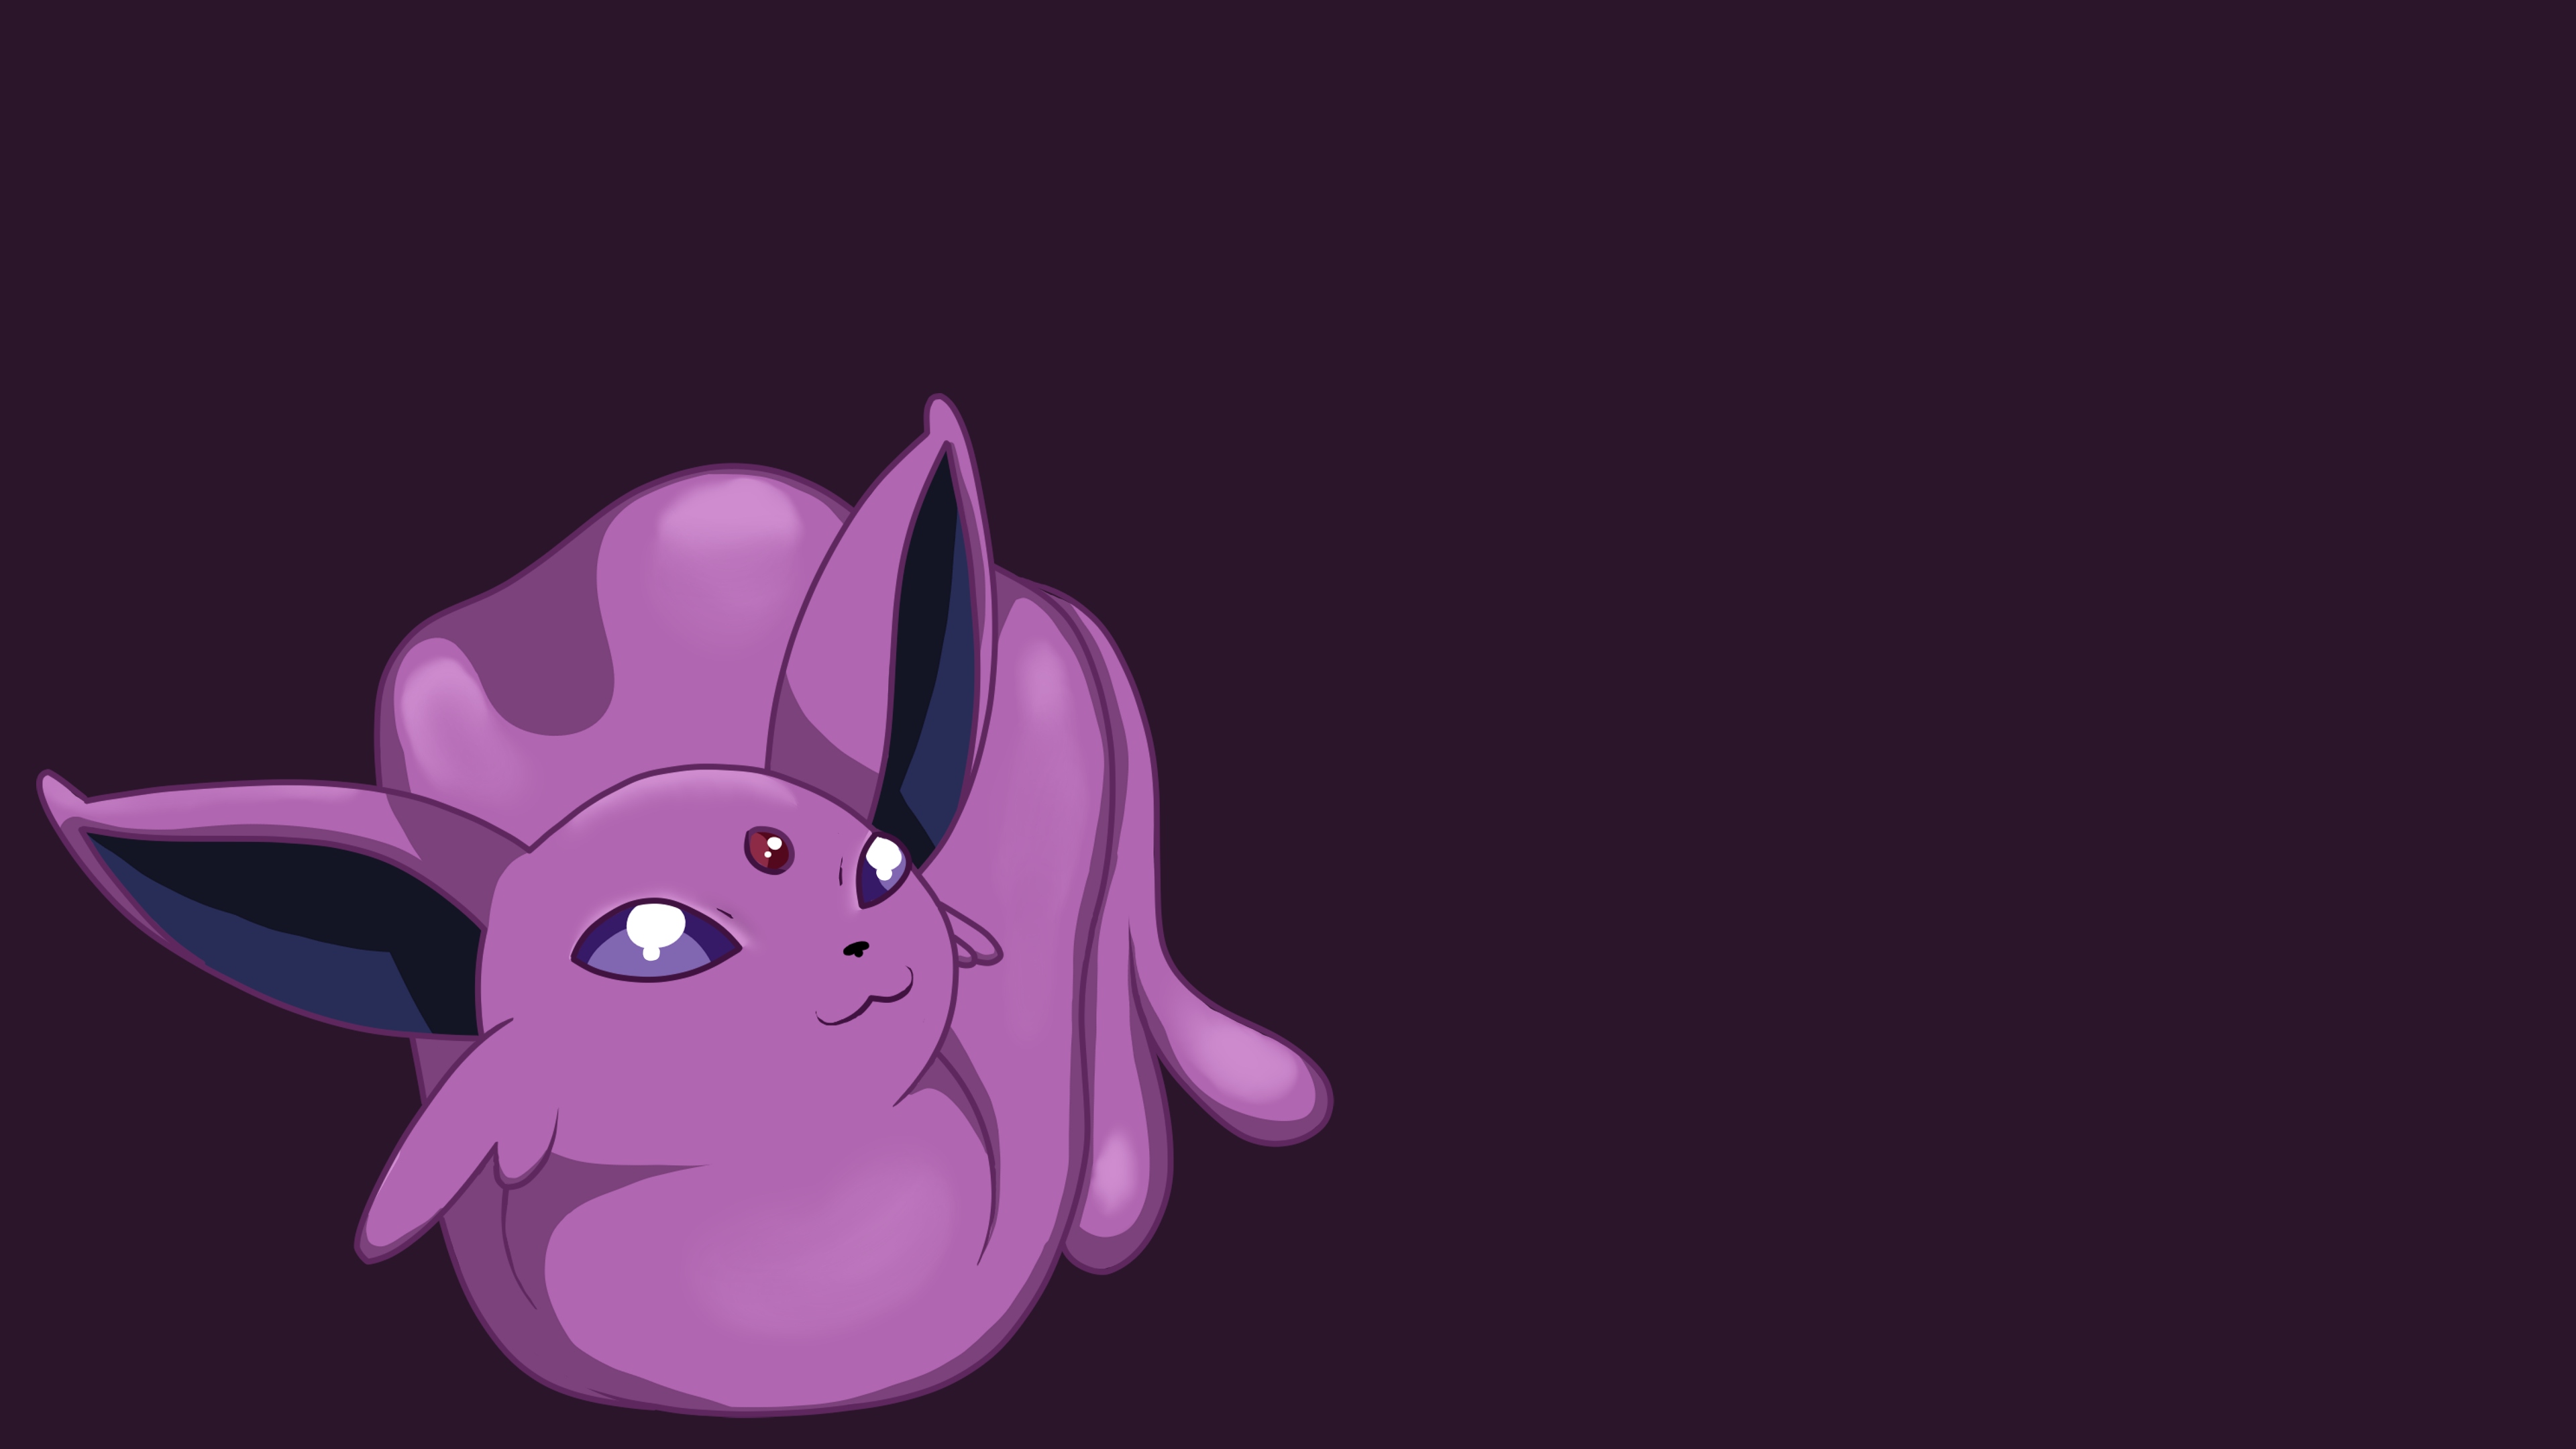 Espeon loaf 4k wallpapers to go with Umbreon! : pokemon